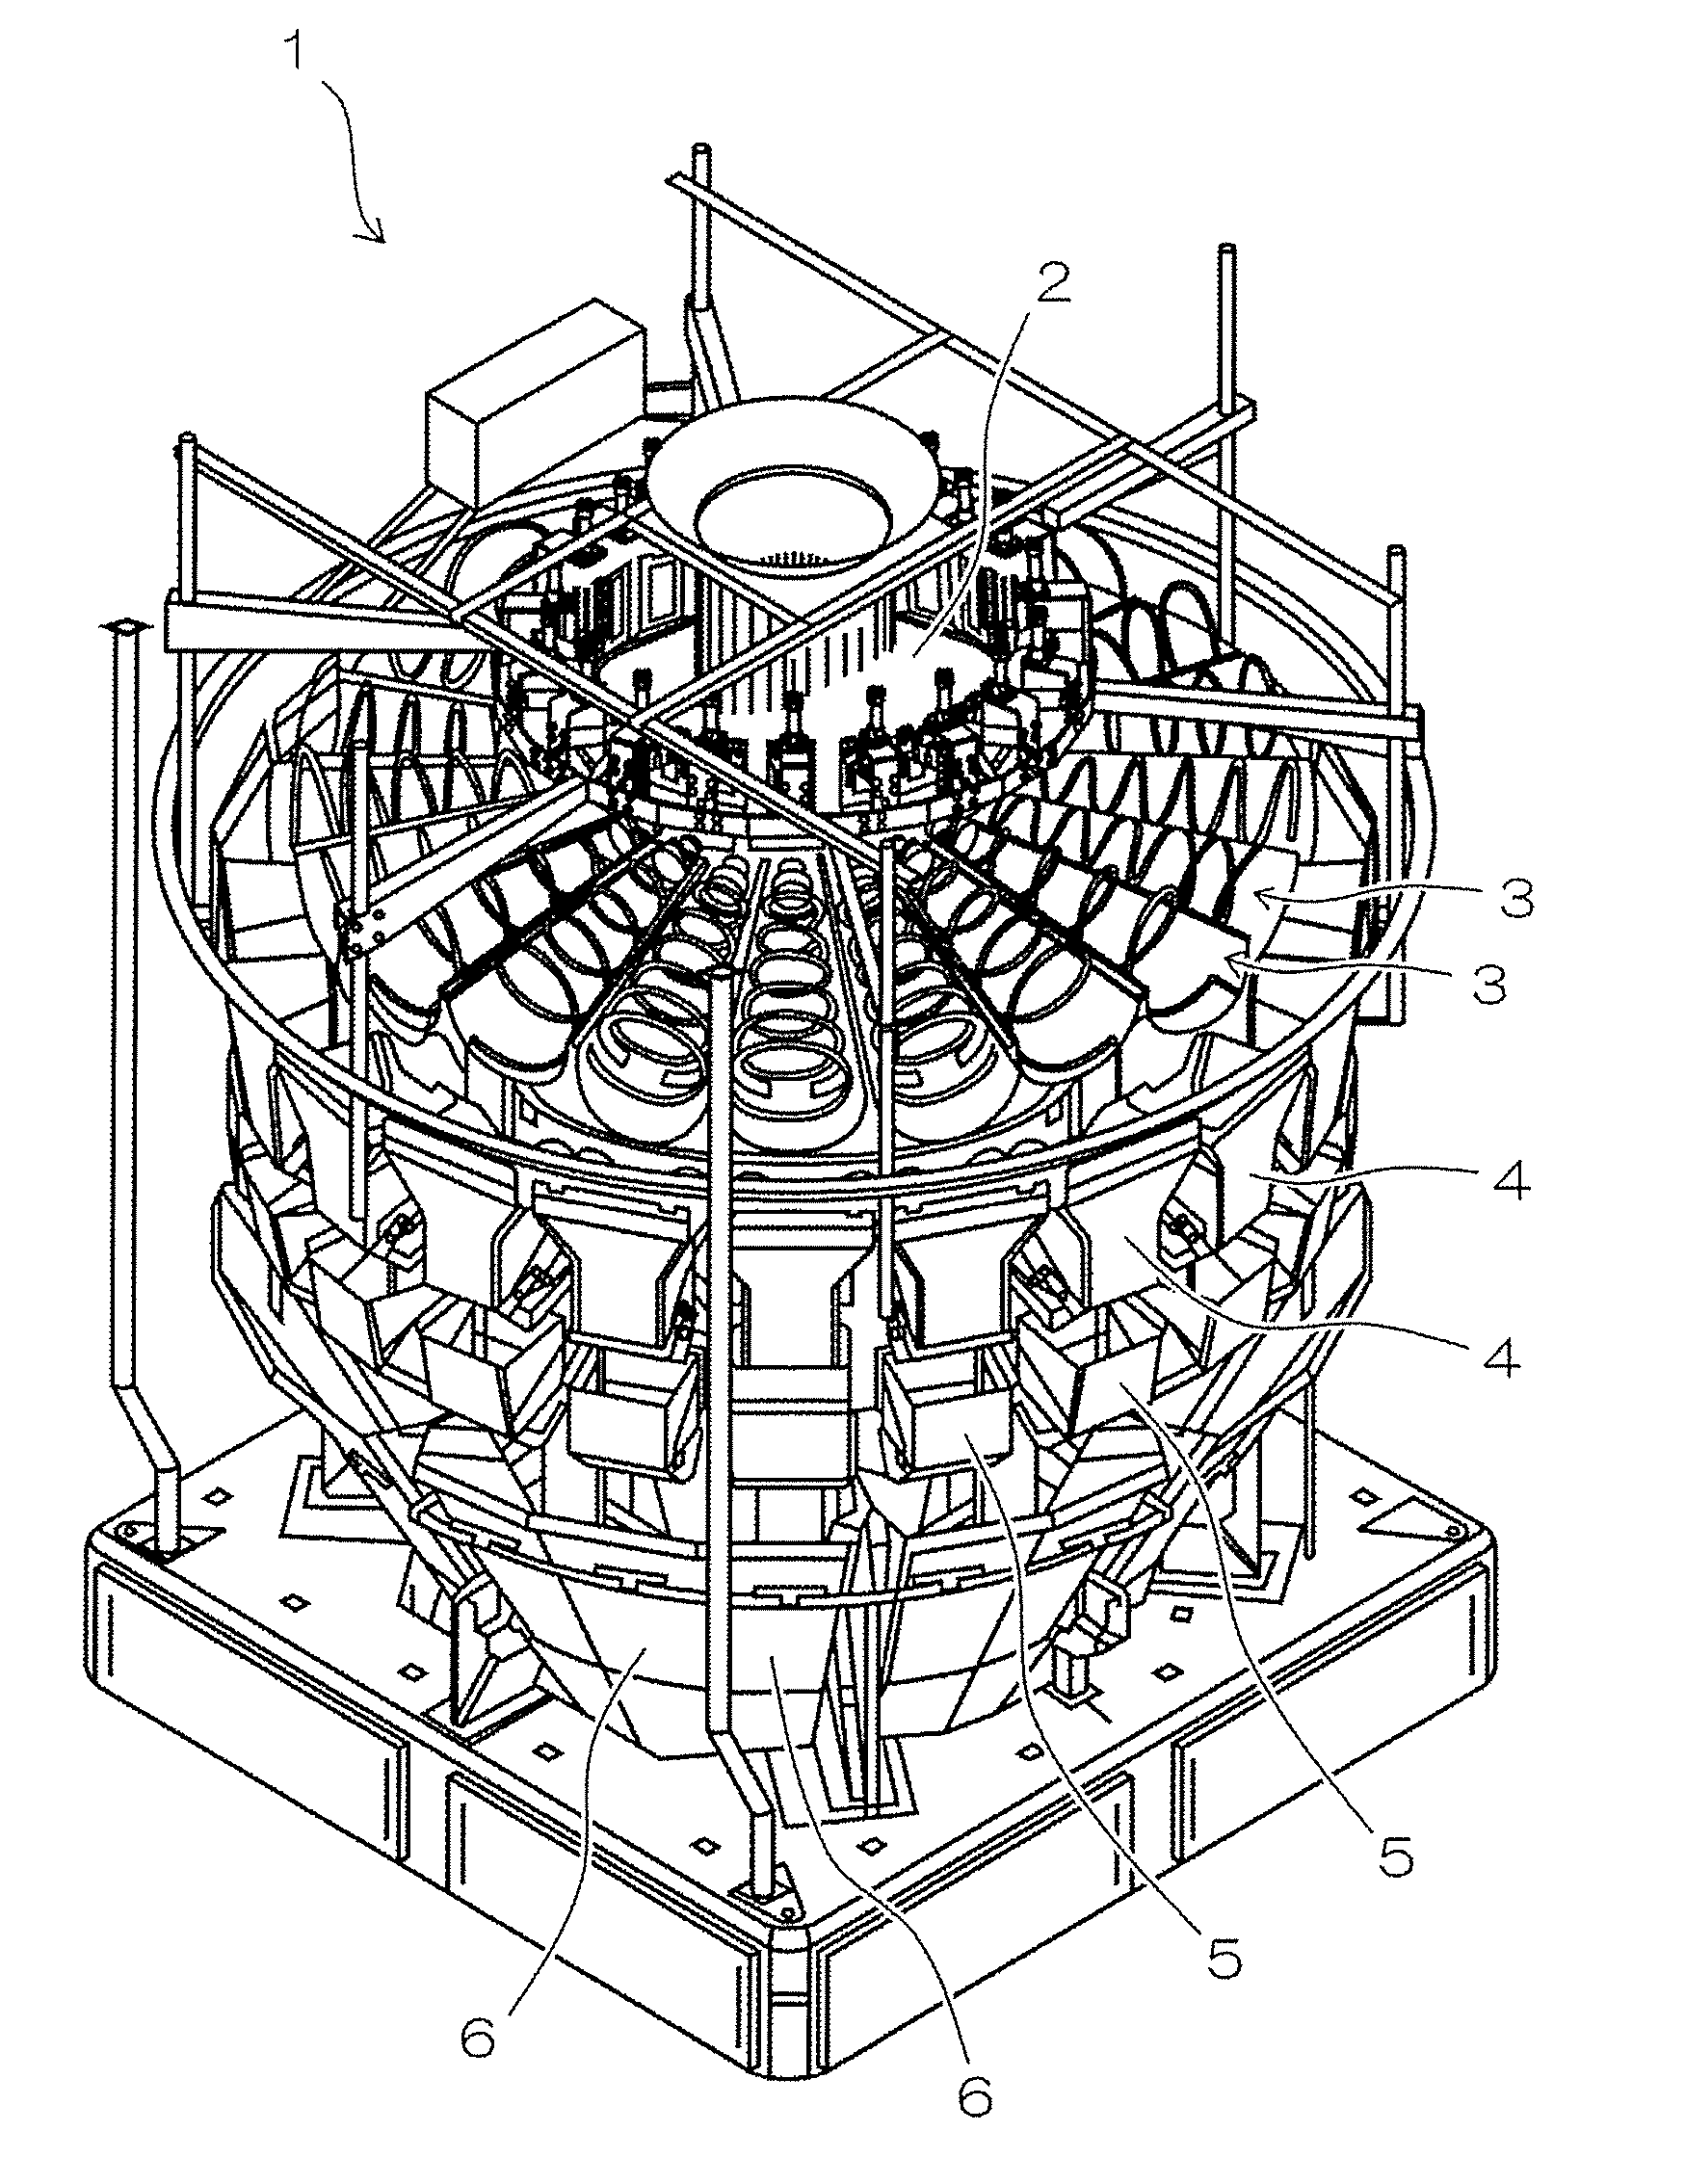 Combination weighing apparatus